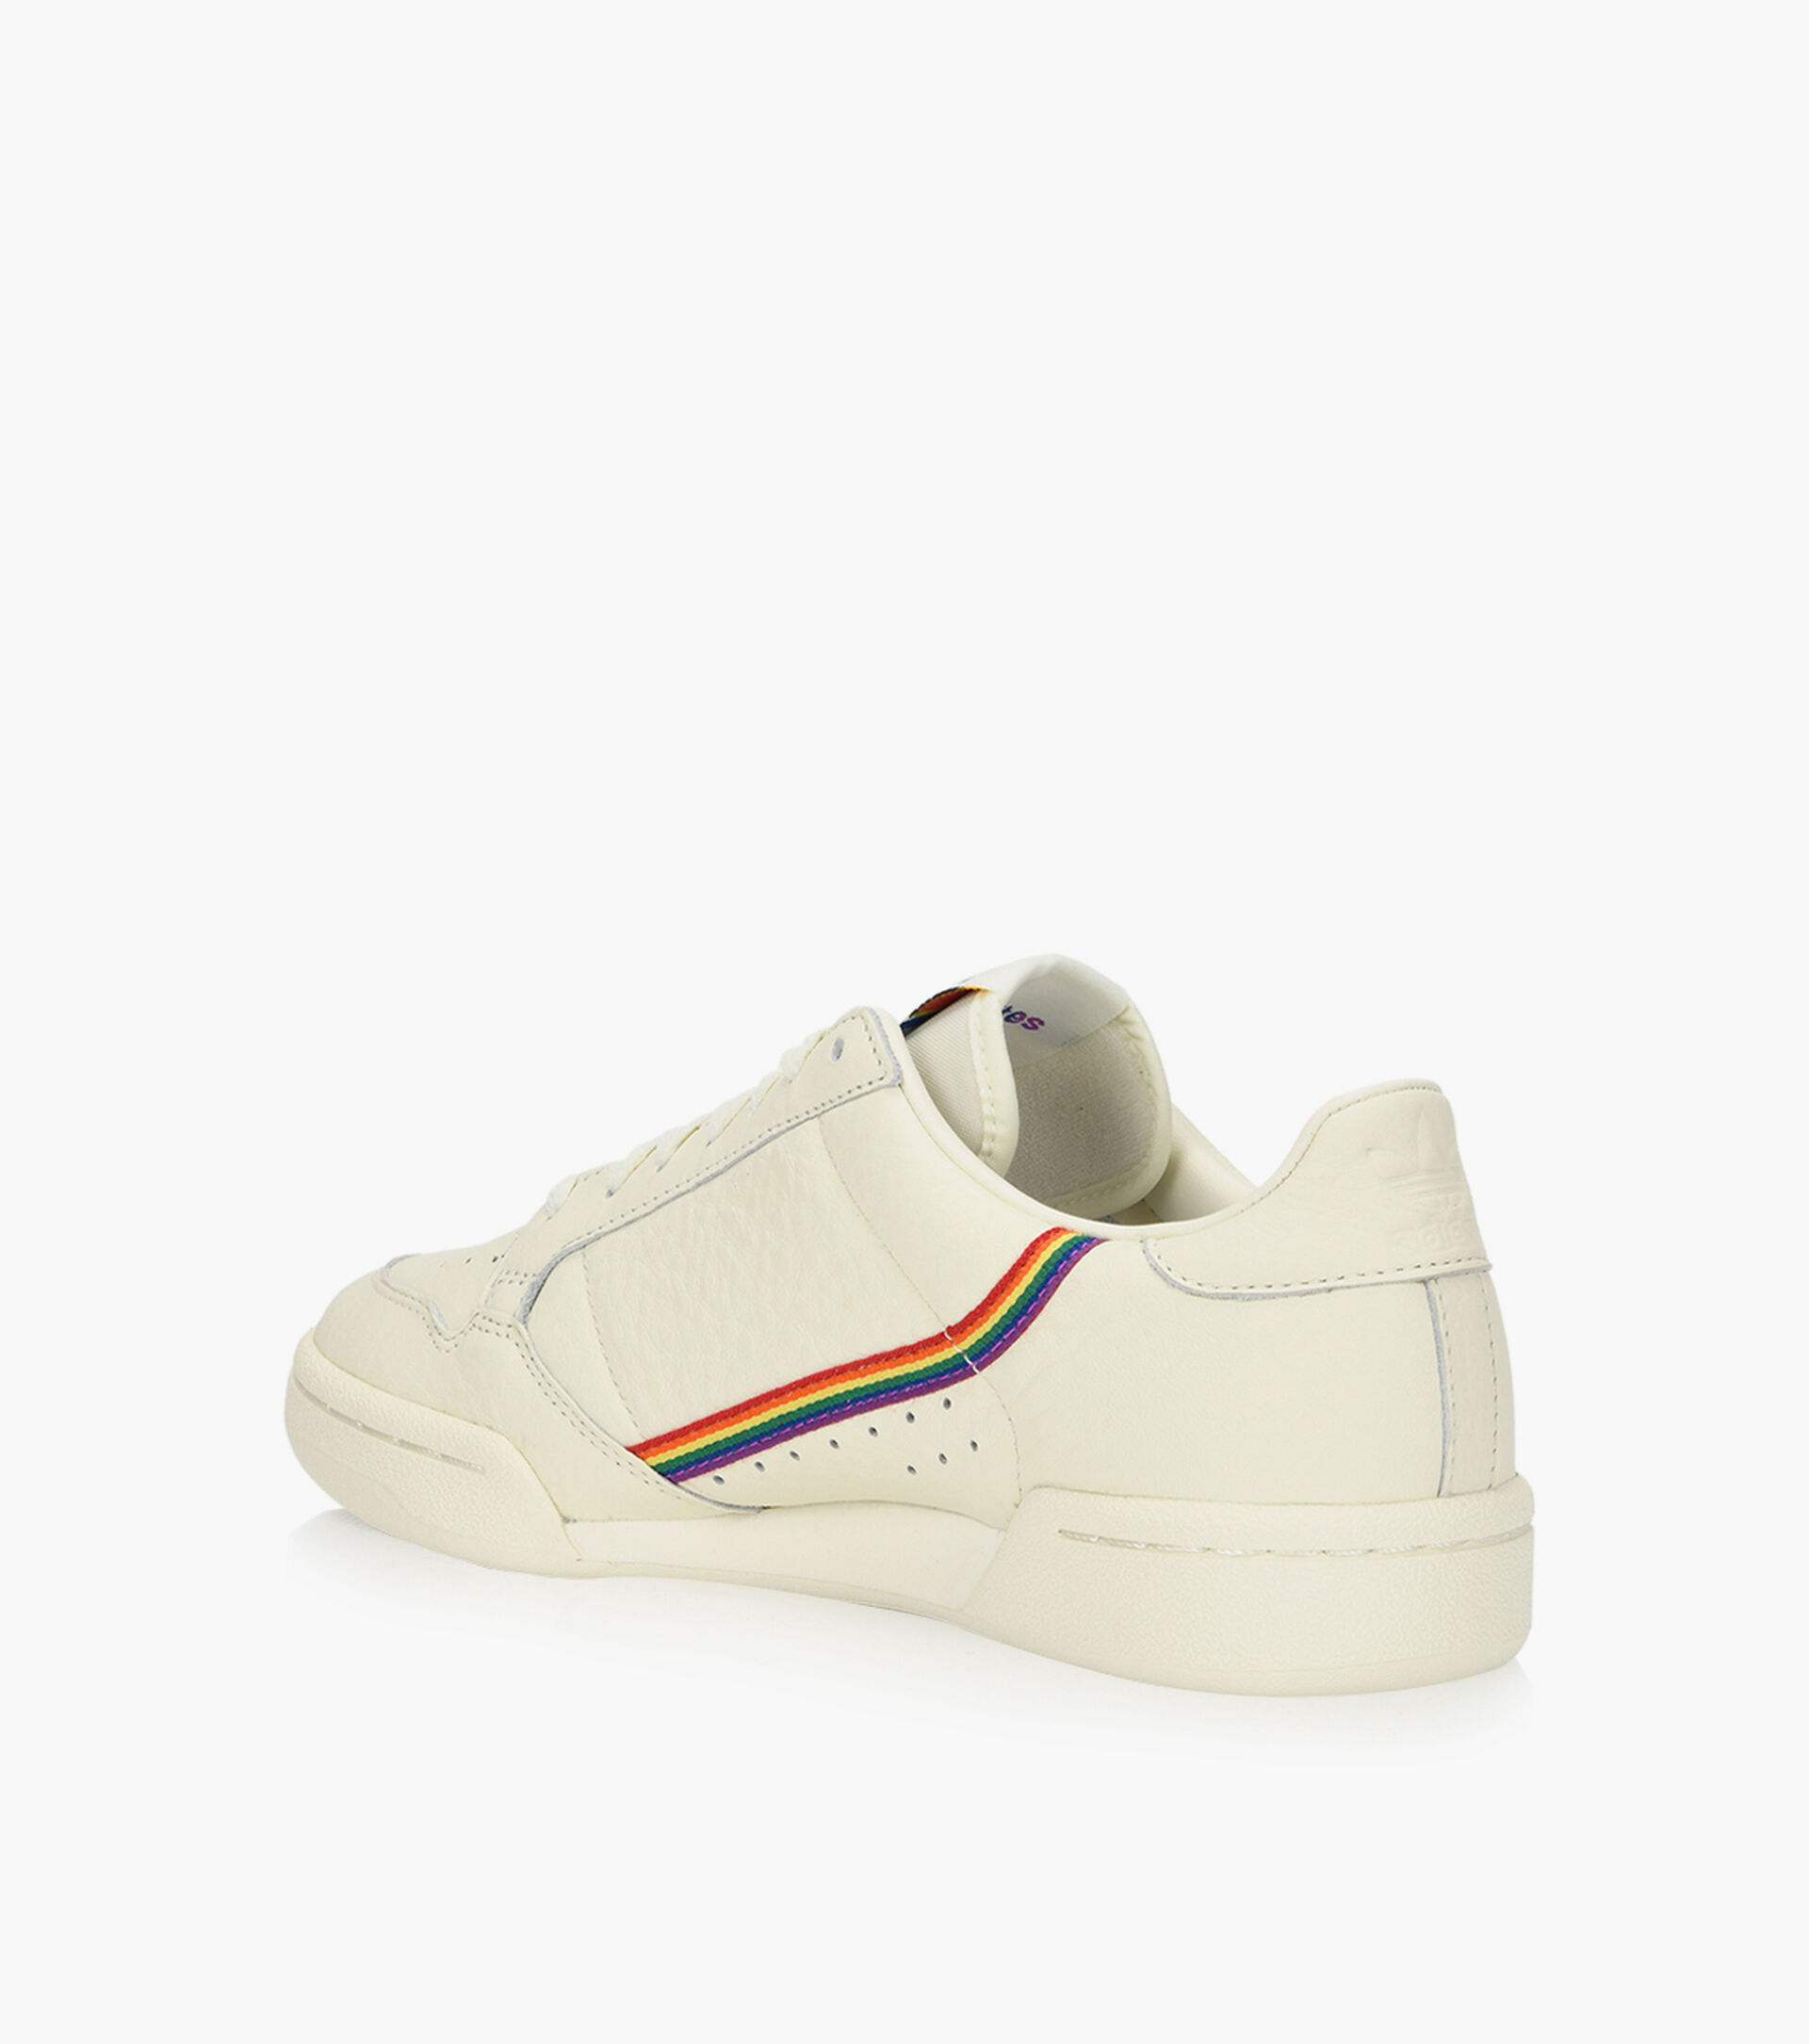 ADIDAS CONTINENTAL 80'S PRIDE - White & Colour Leather | Browns Shoes